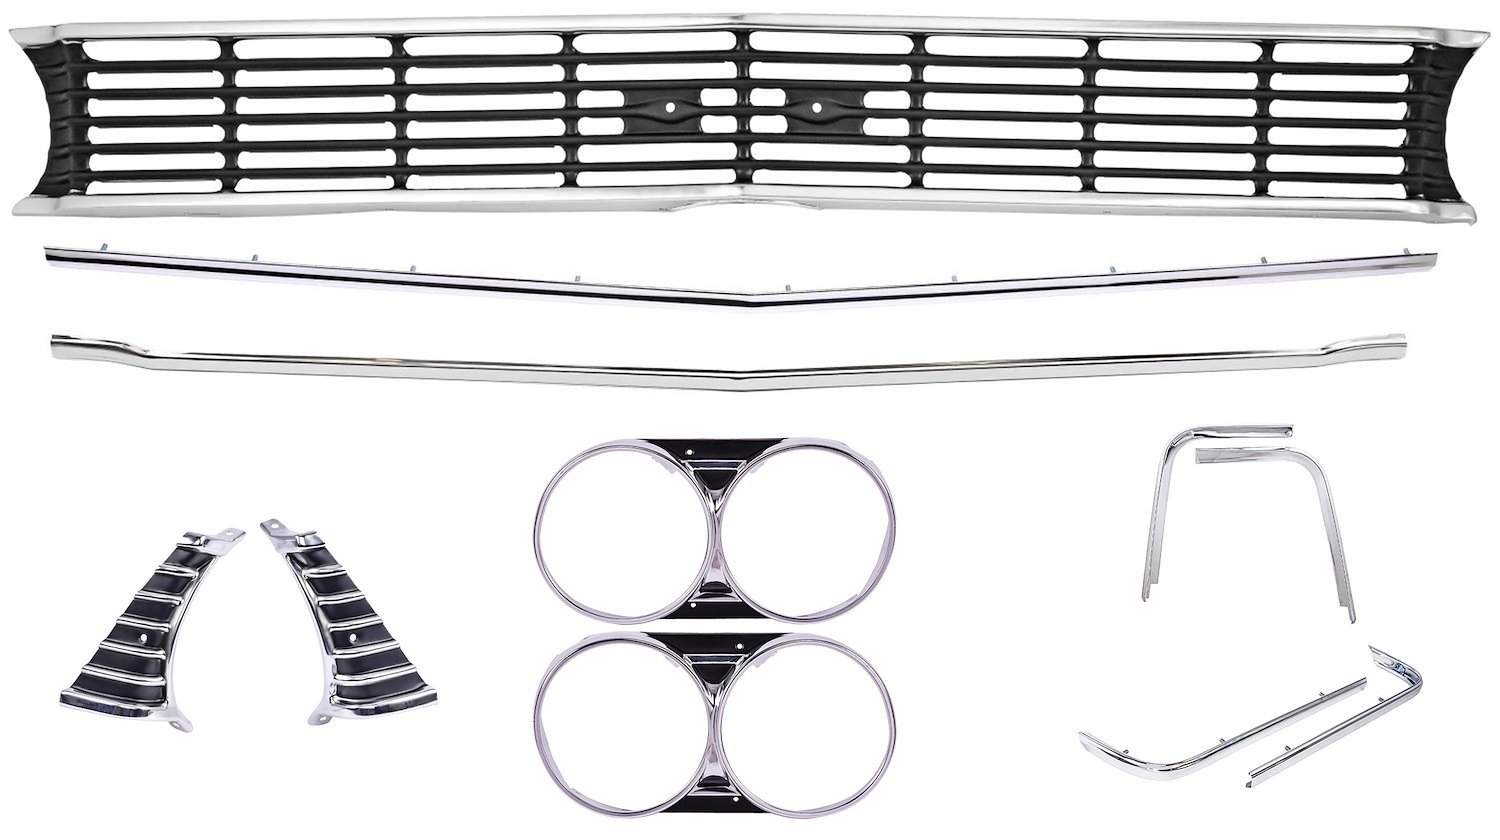 Grille Kit for 1966 Chevrolet Chevelle SS, El Camino SS, Malibu SS